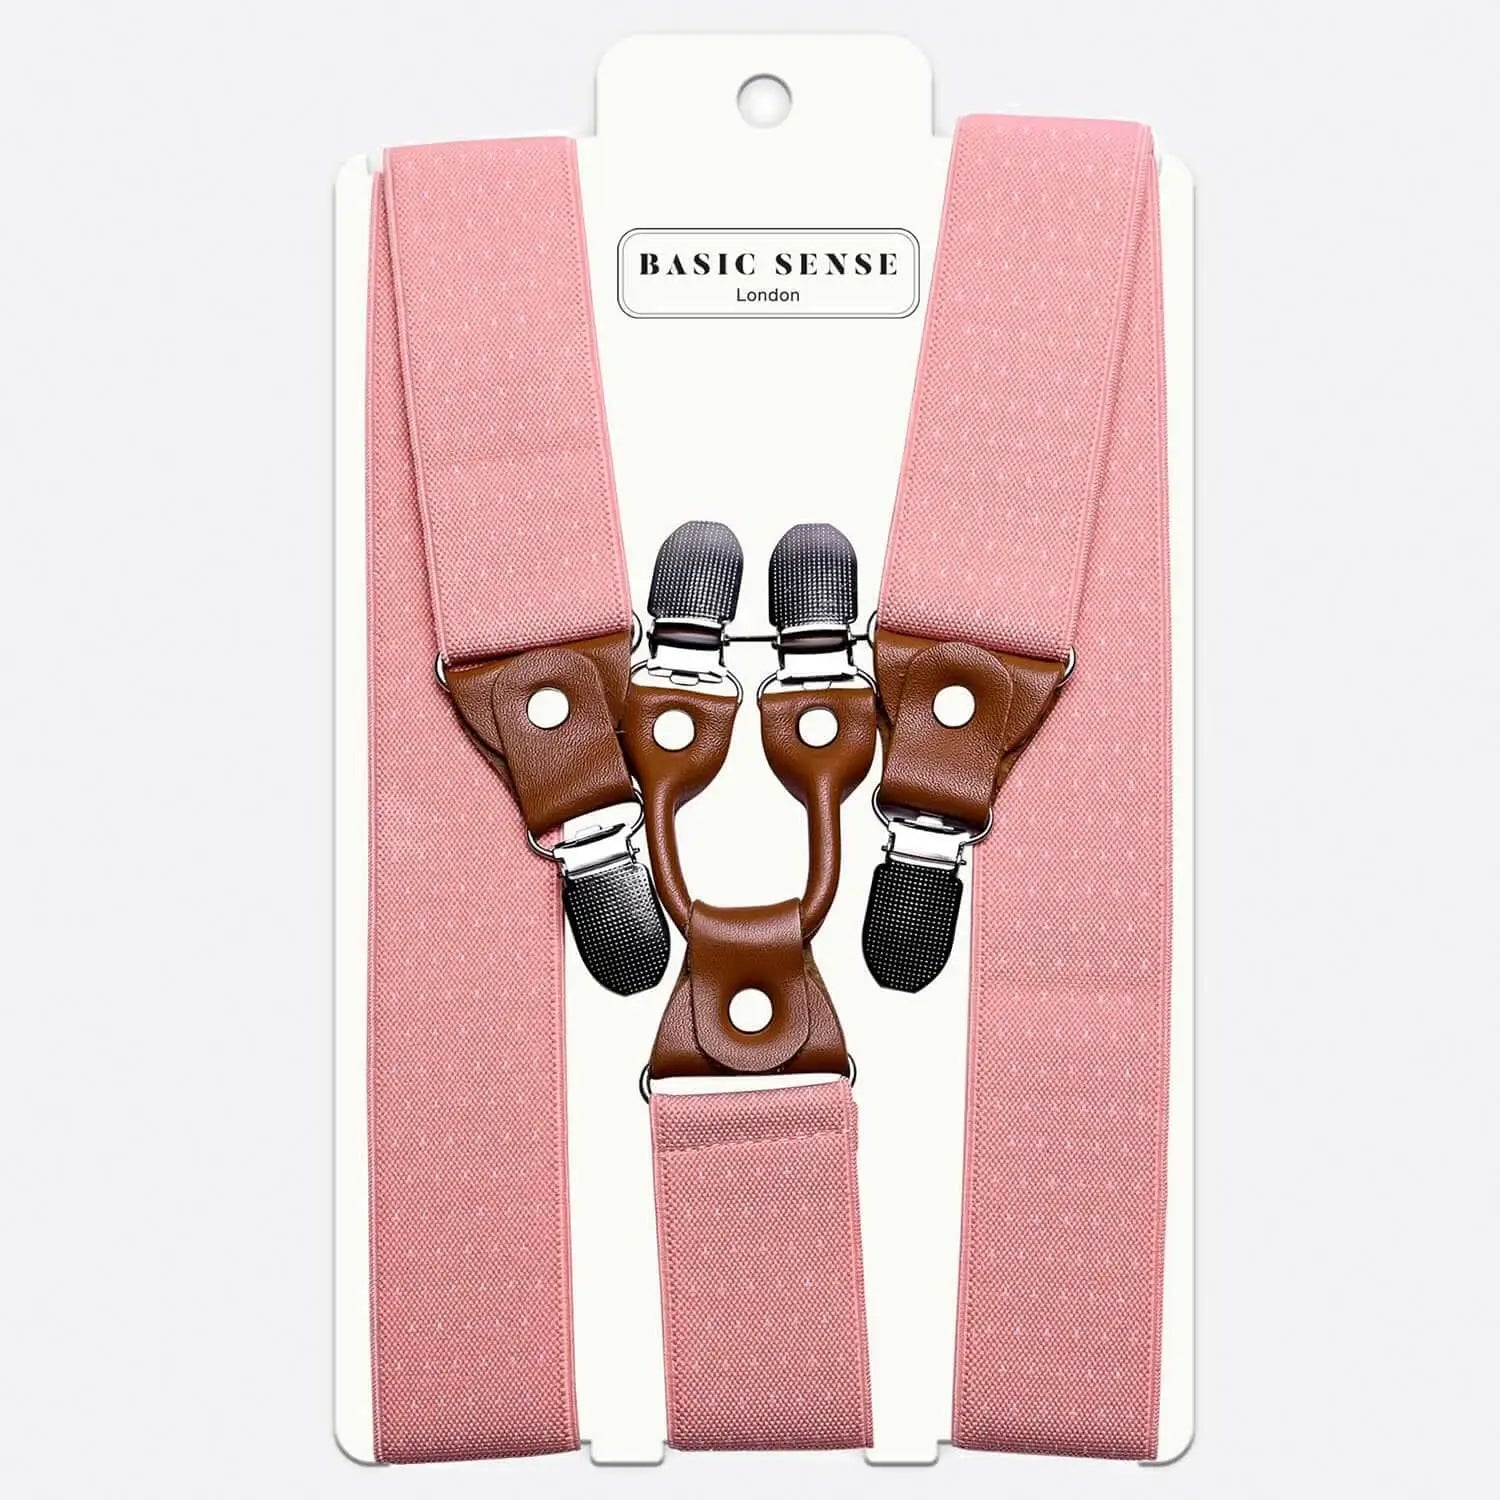 Men’s 35mm Y-Shape Wide Leather Braces with Pink Suspender